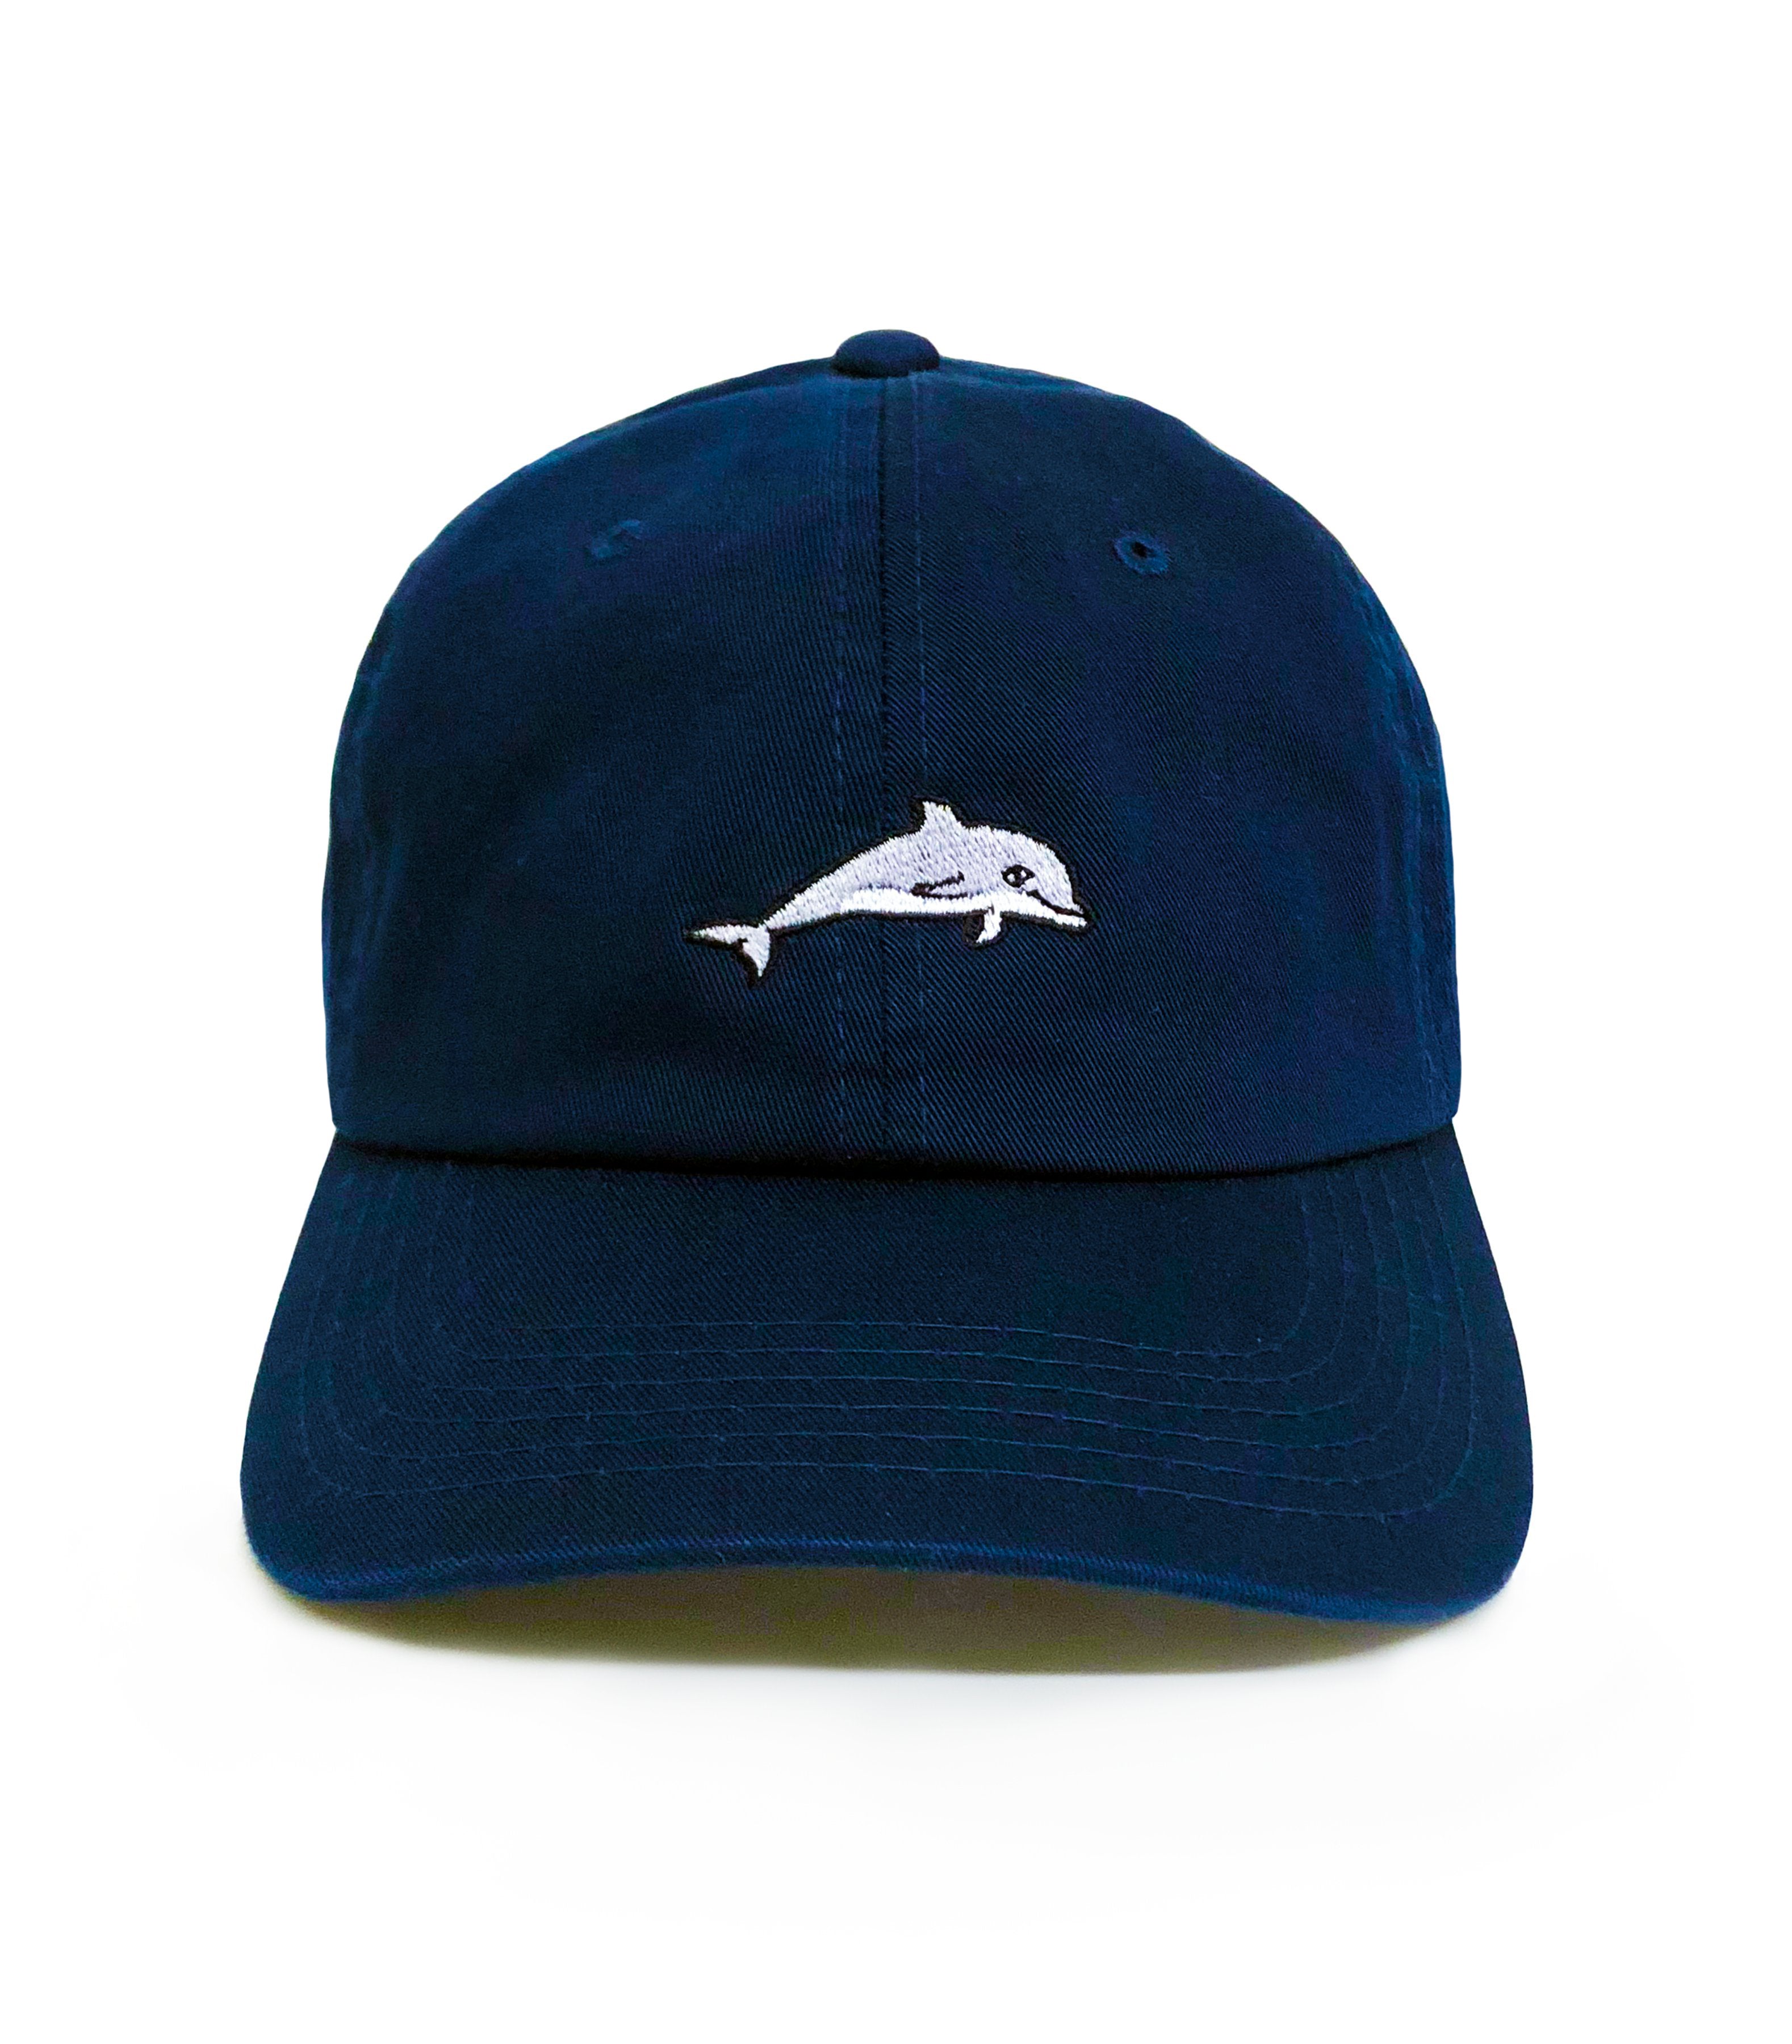 Lucky Dog Fly Fishing Dad Hat Cap Adjustable Navy Blue Strapback Imperial  OSFA